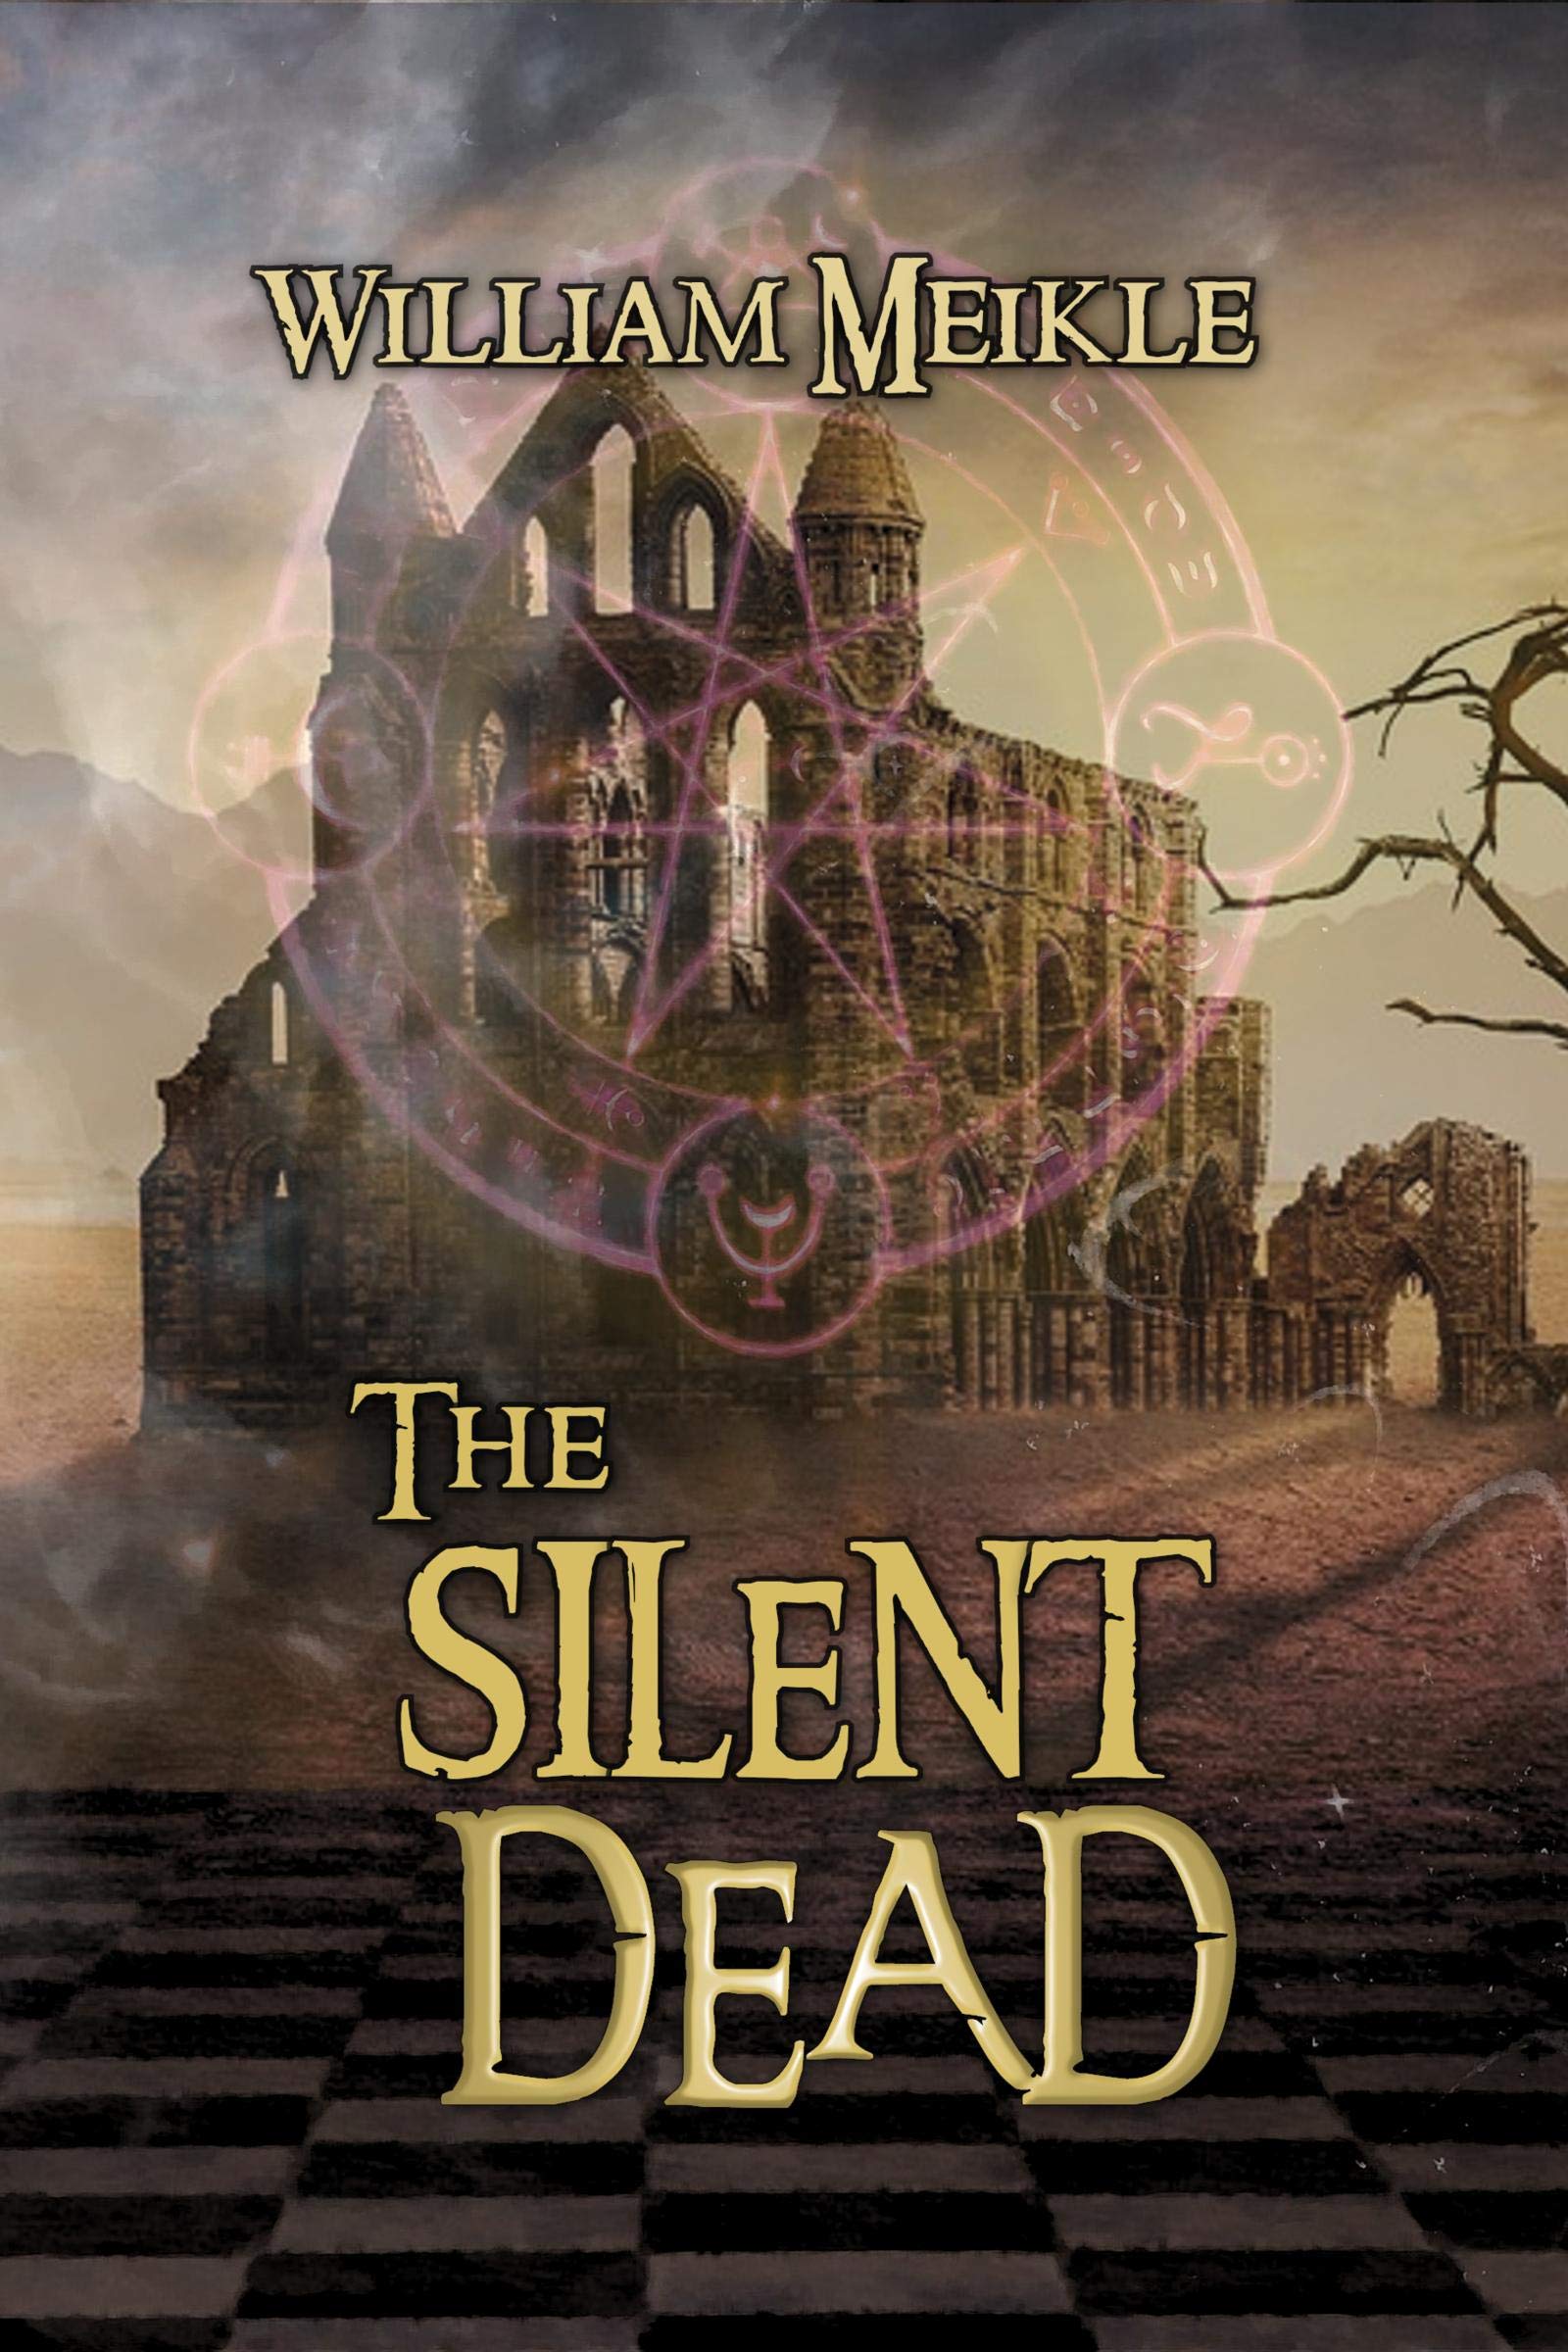 William Meikle - The silent dead